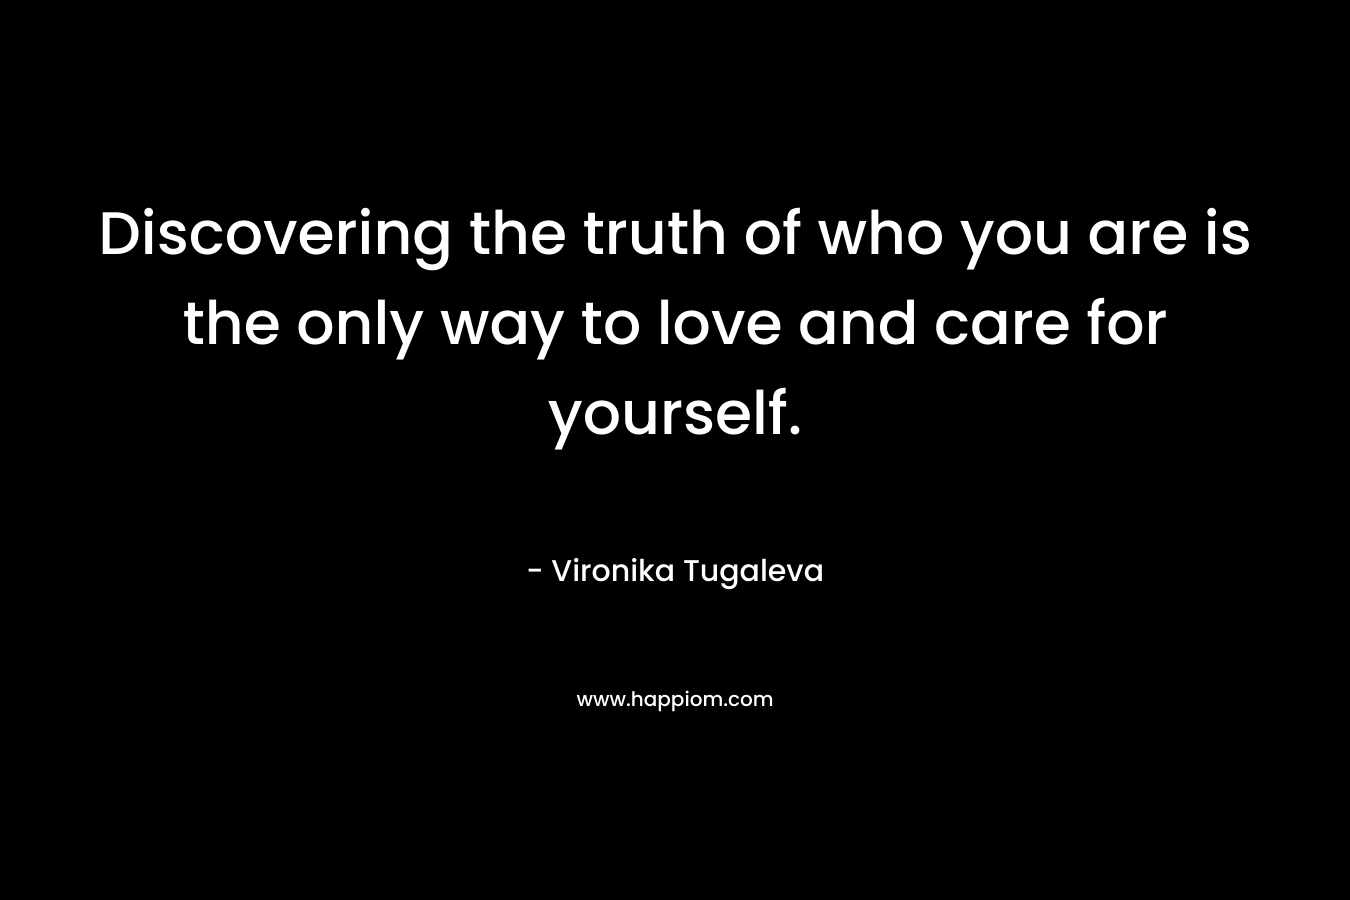 Discovering the truth of who you are is the only way to love and care for yourself.